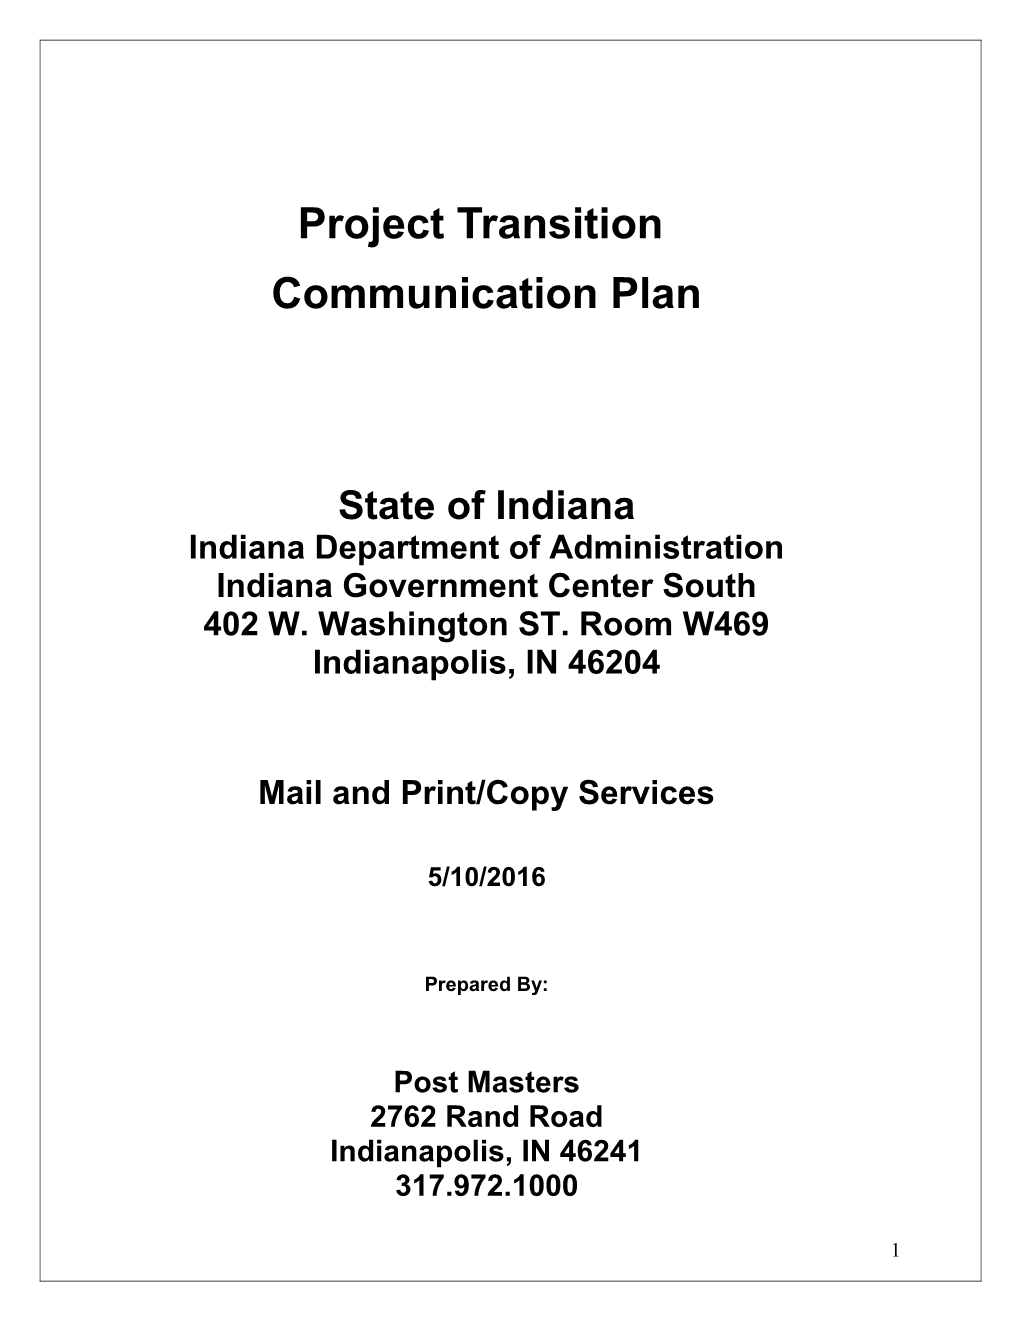 Project Transition Plan